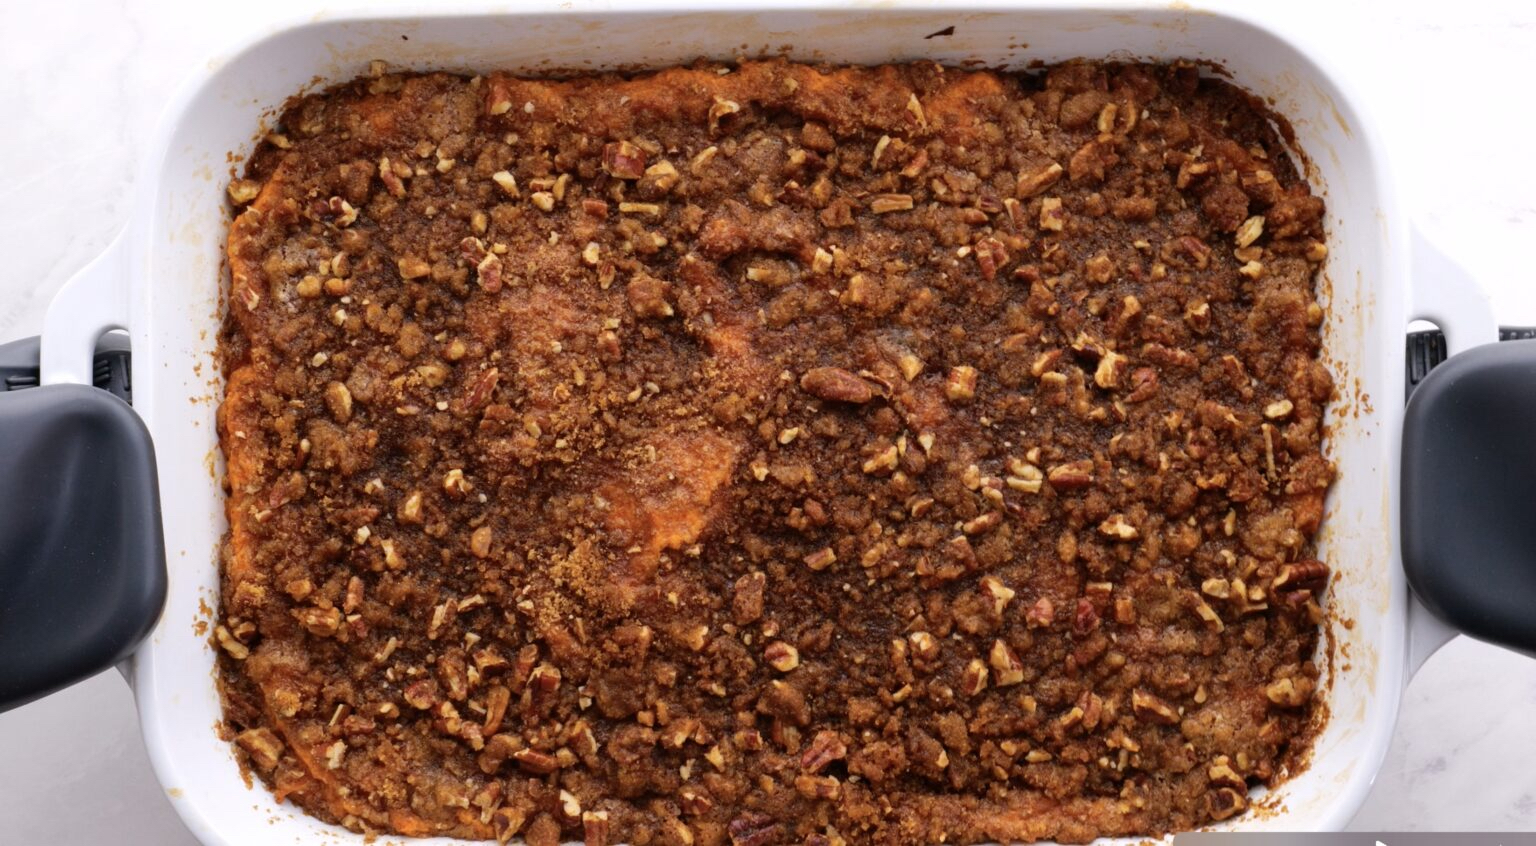 Sweet Potato Casserole with Pecan Topping